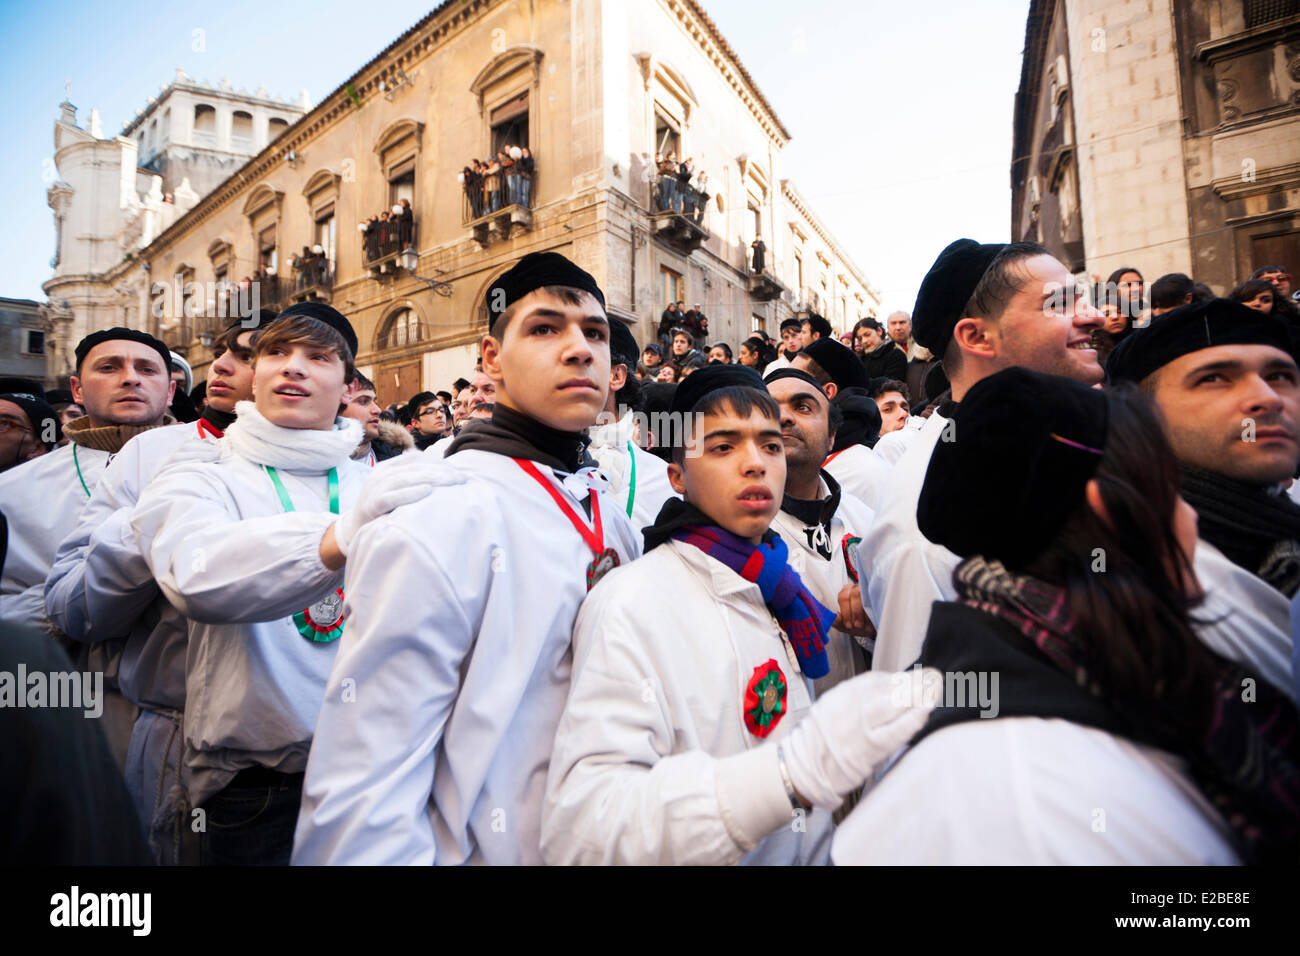 Italy, Sicily, Catania, listed as World Heritage by UNESCO, Sant'Agata festivity, young devotees Stock Photo